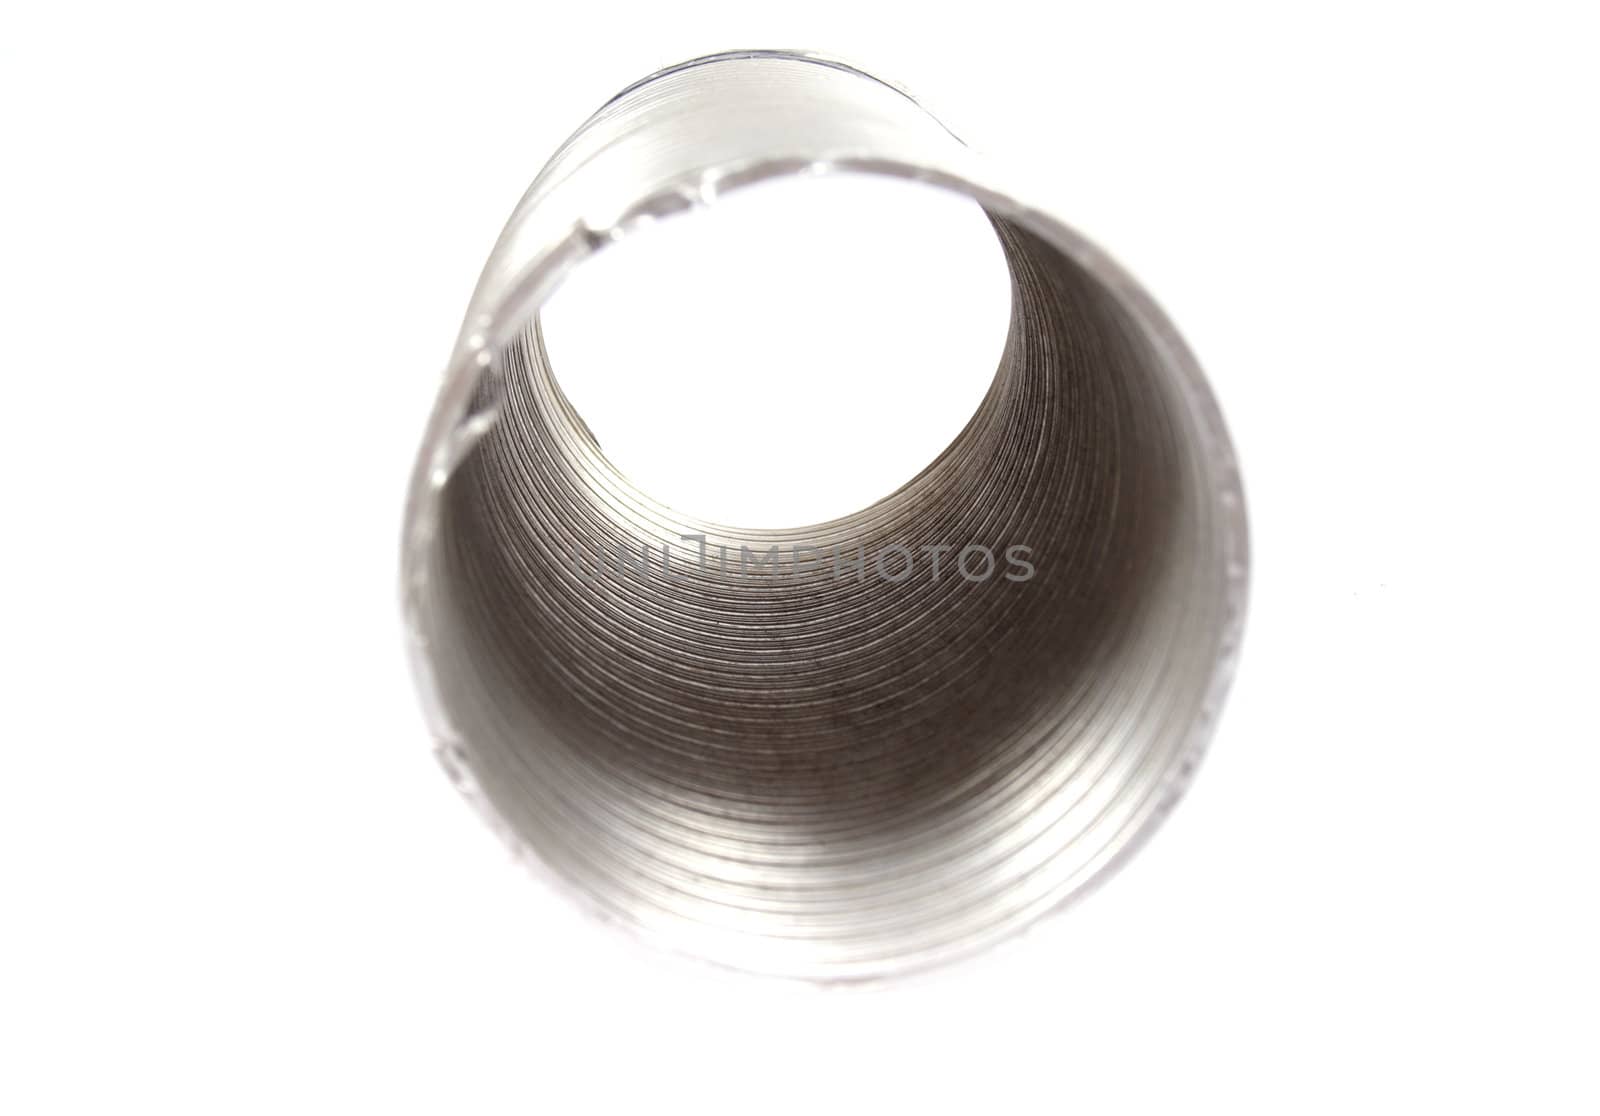 the metal pipe photo of abstract background